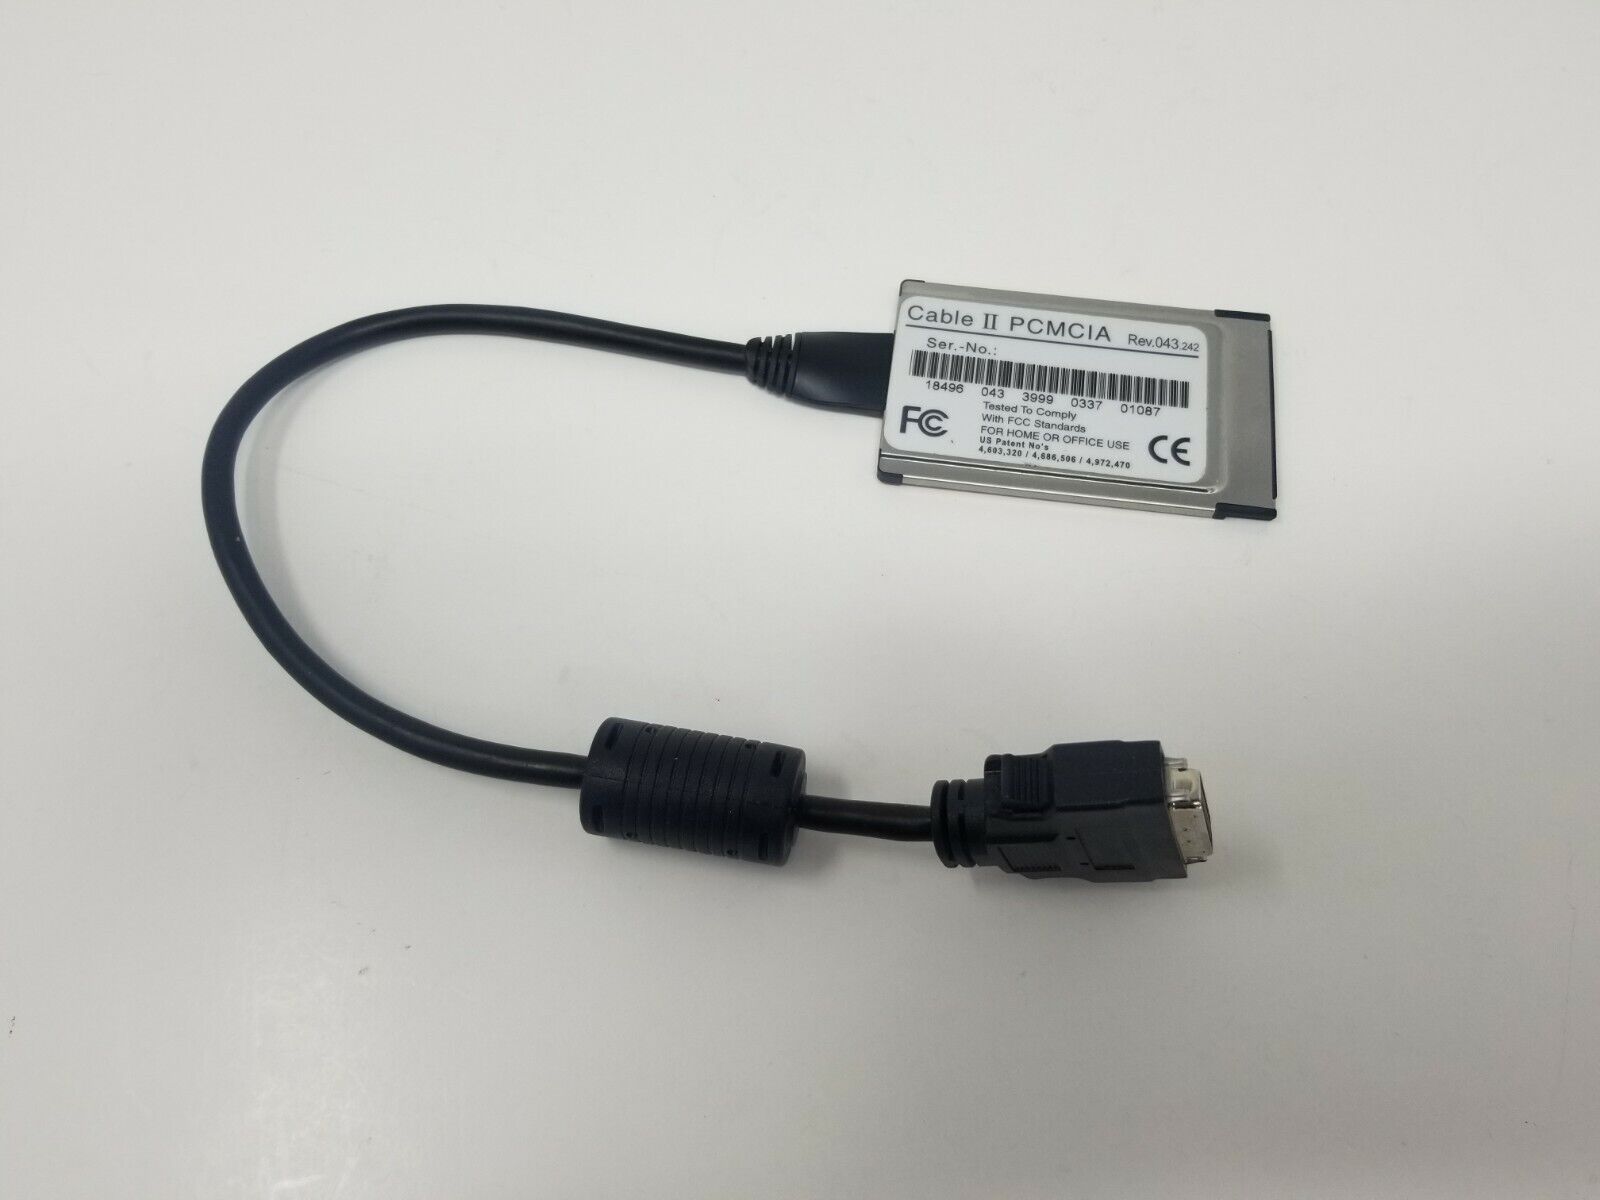 Port Note Worthy PC Card Cable II PCMCIA Card DVD ROM Drive 